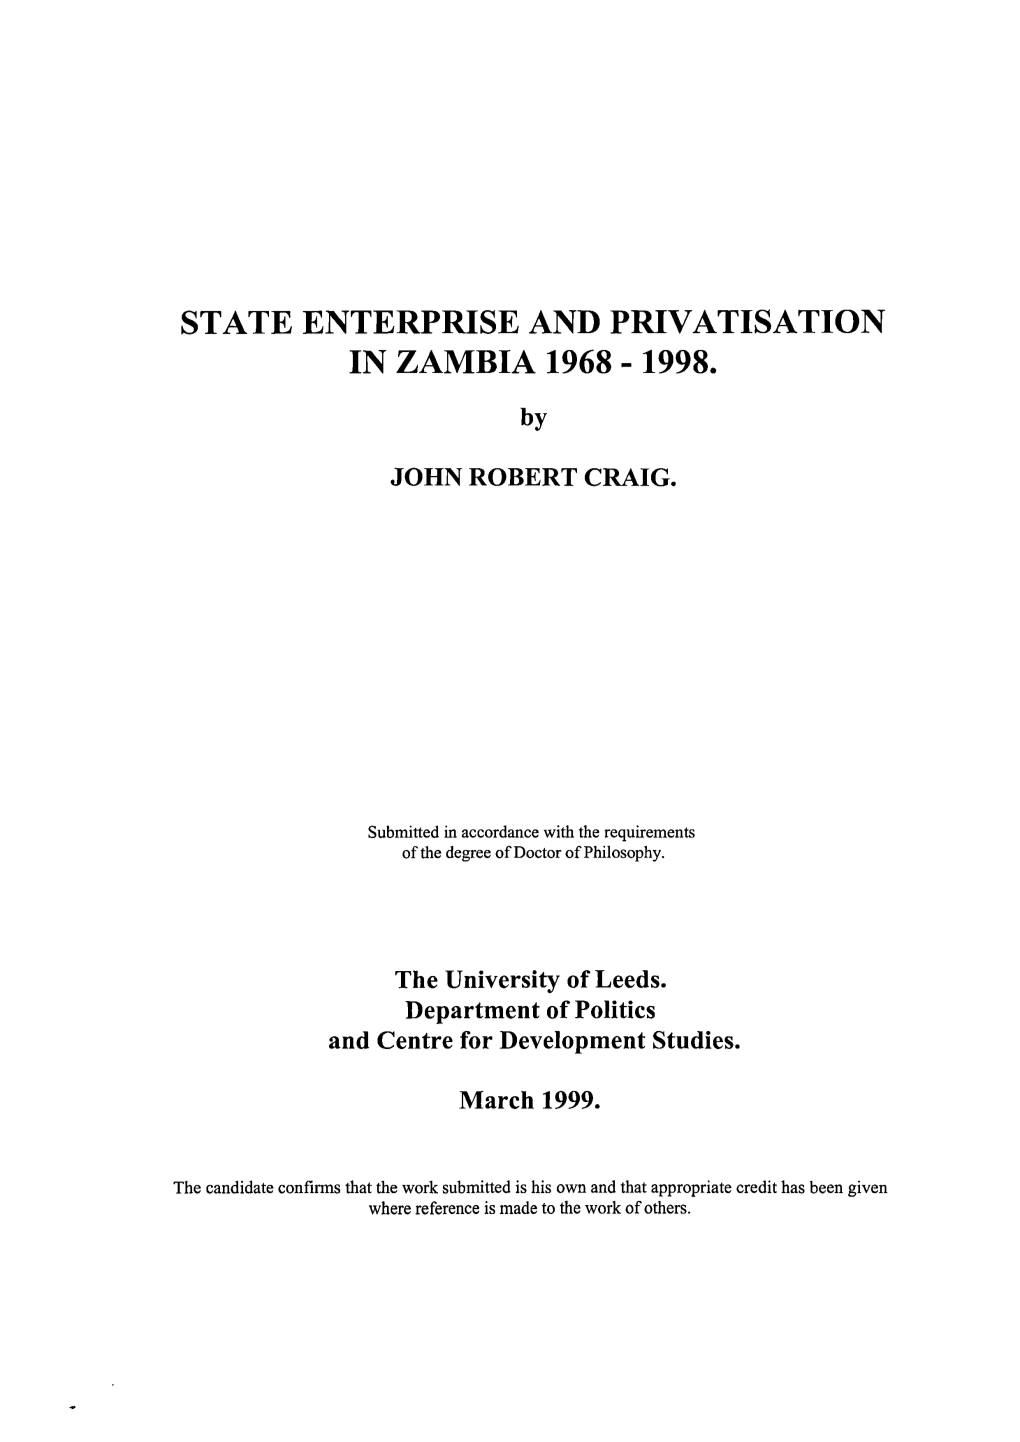 State Enterprise and Privatisation in Zambia 1968 - 1998